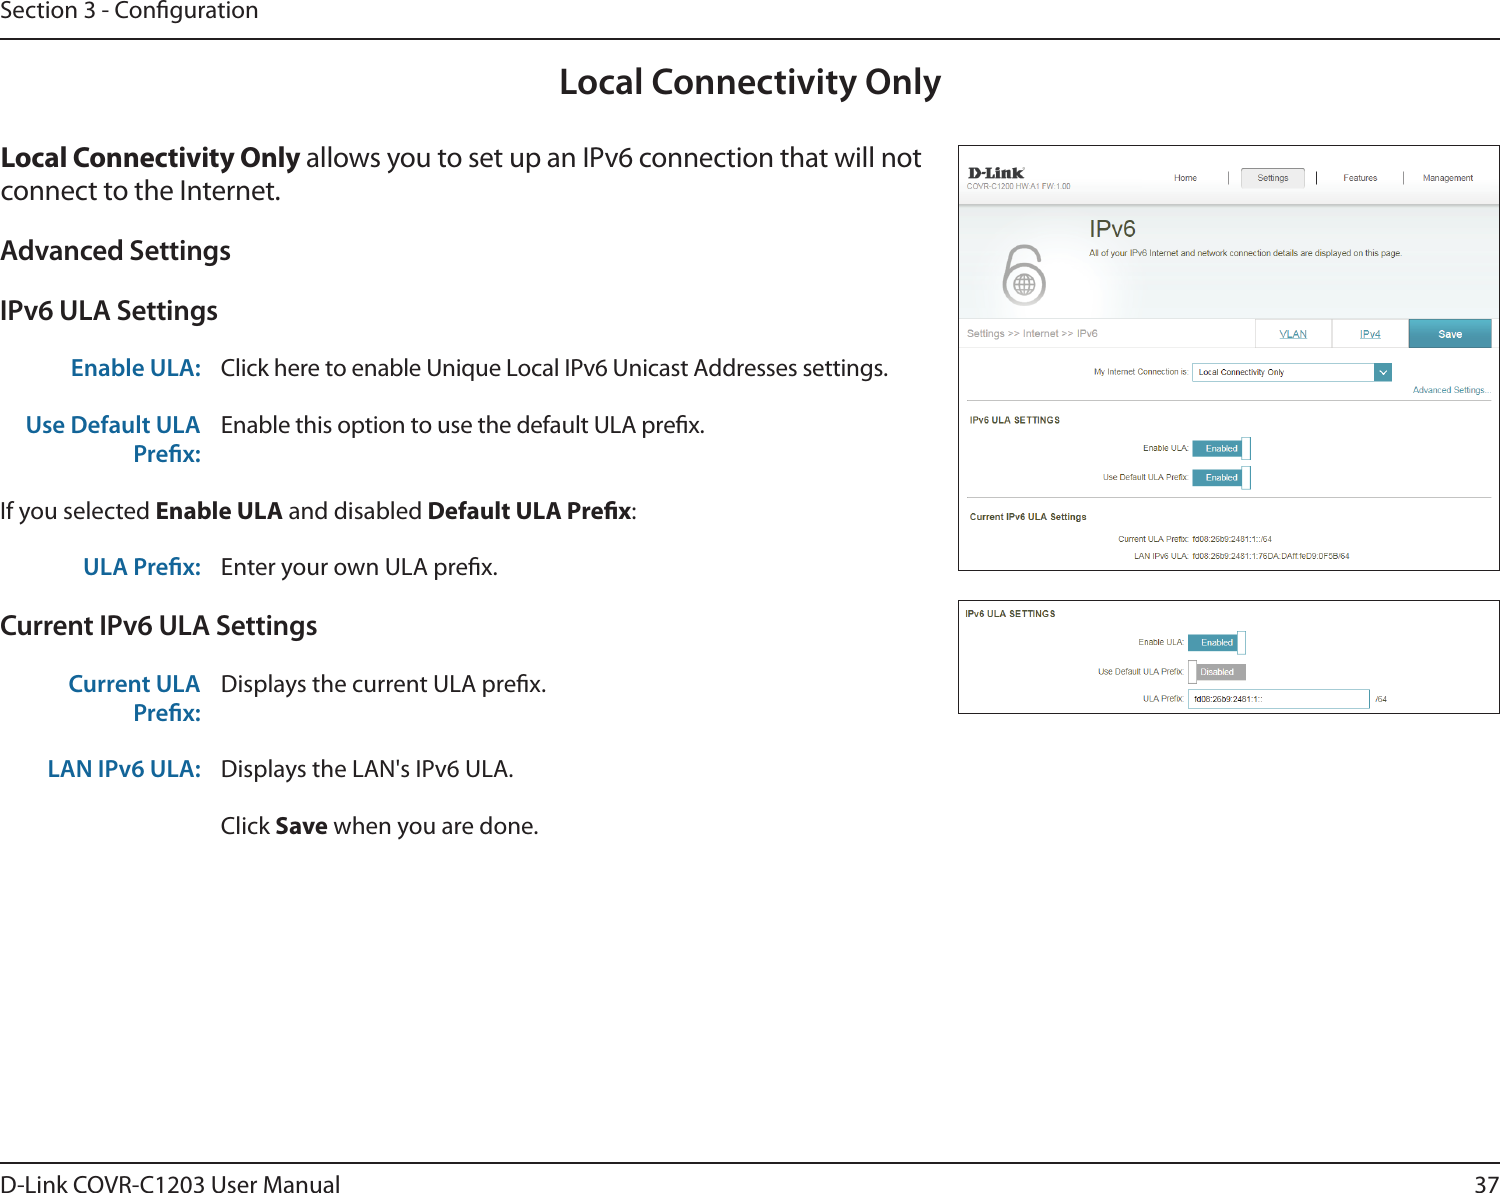 37D-Link COVR-C1203 User ManualSection 3 - CongurationLocal Connectivity OnlyLocal Connectivity Only allows you to set up an IPv6 connection that will not connect to the Internet.Advanced SettingsIPv6 ULA SettingsEnable ULA: Click here to enable Unique Local IPv6 Unicast Addresses settings.Use Default ULA Prex:Enable this option to use the default ULA prex.If you selected Enable ULA and disabled Default ULA Prex:ULA Prex: Enter your own ULA prex.Current IPv6 ULA SettingsCurrent ULA Prex:Displays the current ULA prex. LAN IPv6 ULA: Displays the LAN&apos;s IPv6 ULA.Click Save when you are done.